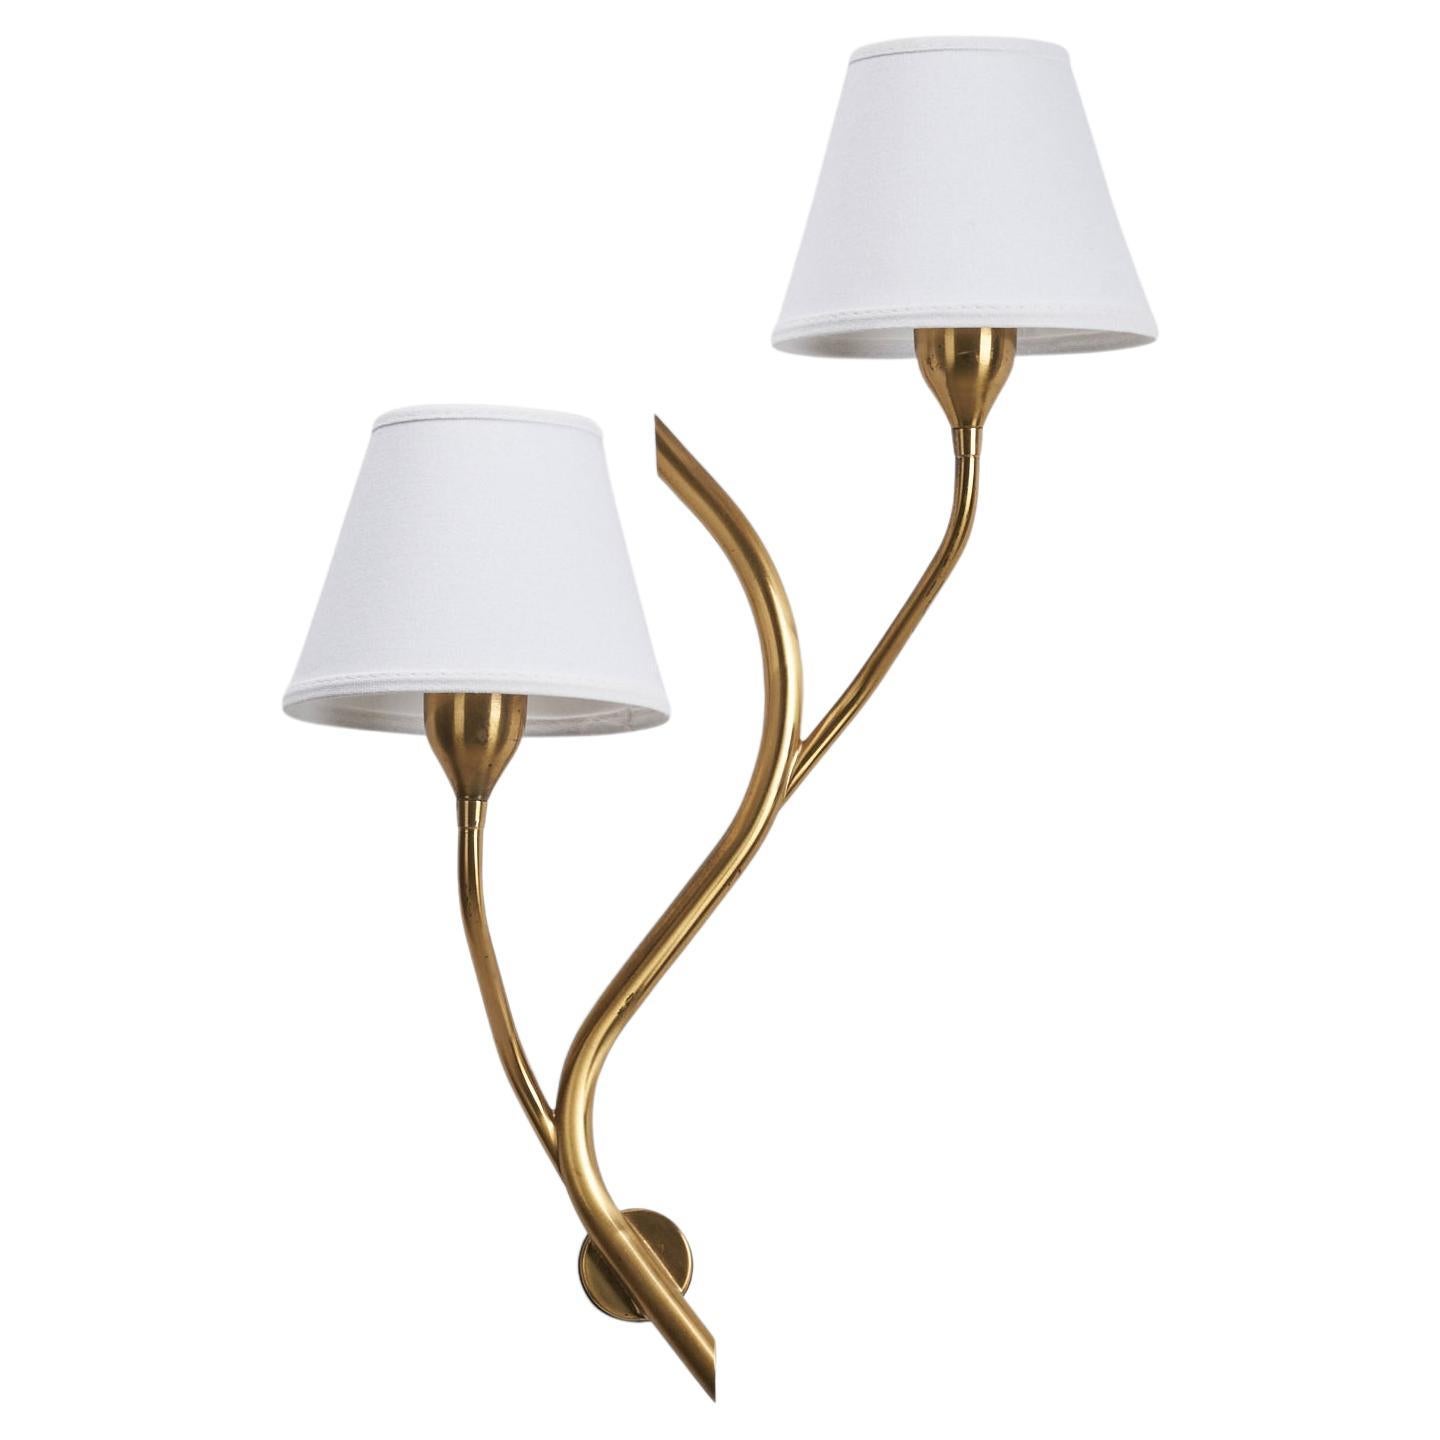 Astra, Wall Light, Brass, White Fabric, Norway, 1950s For Sale